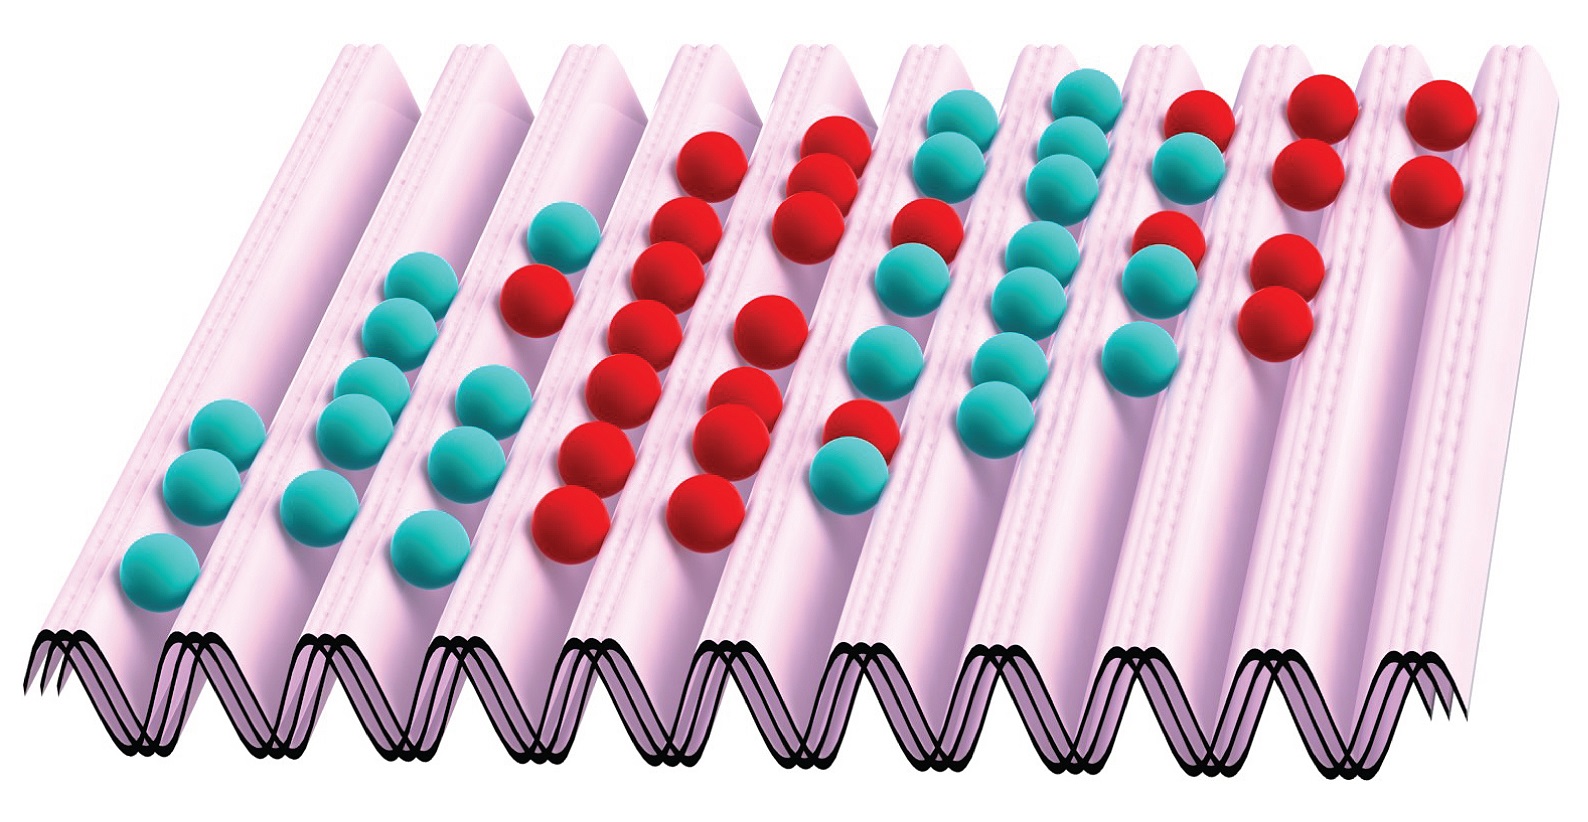 Researchers confirm decades-old theory describing principles of phase transitions